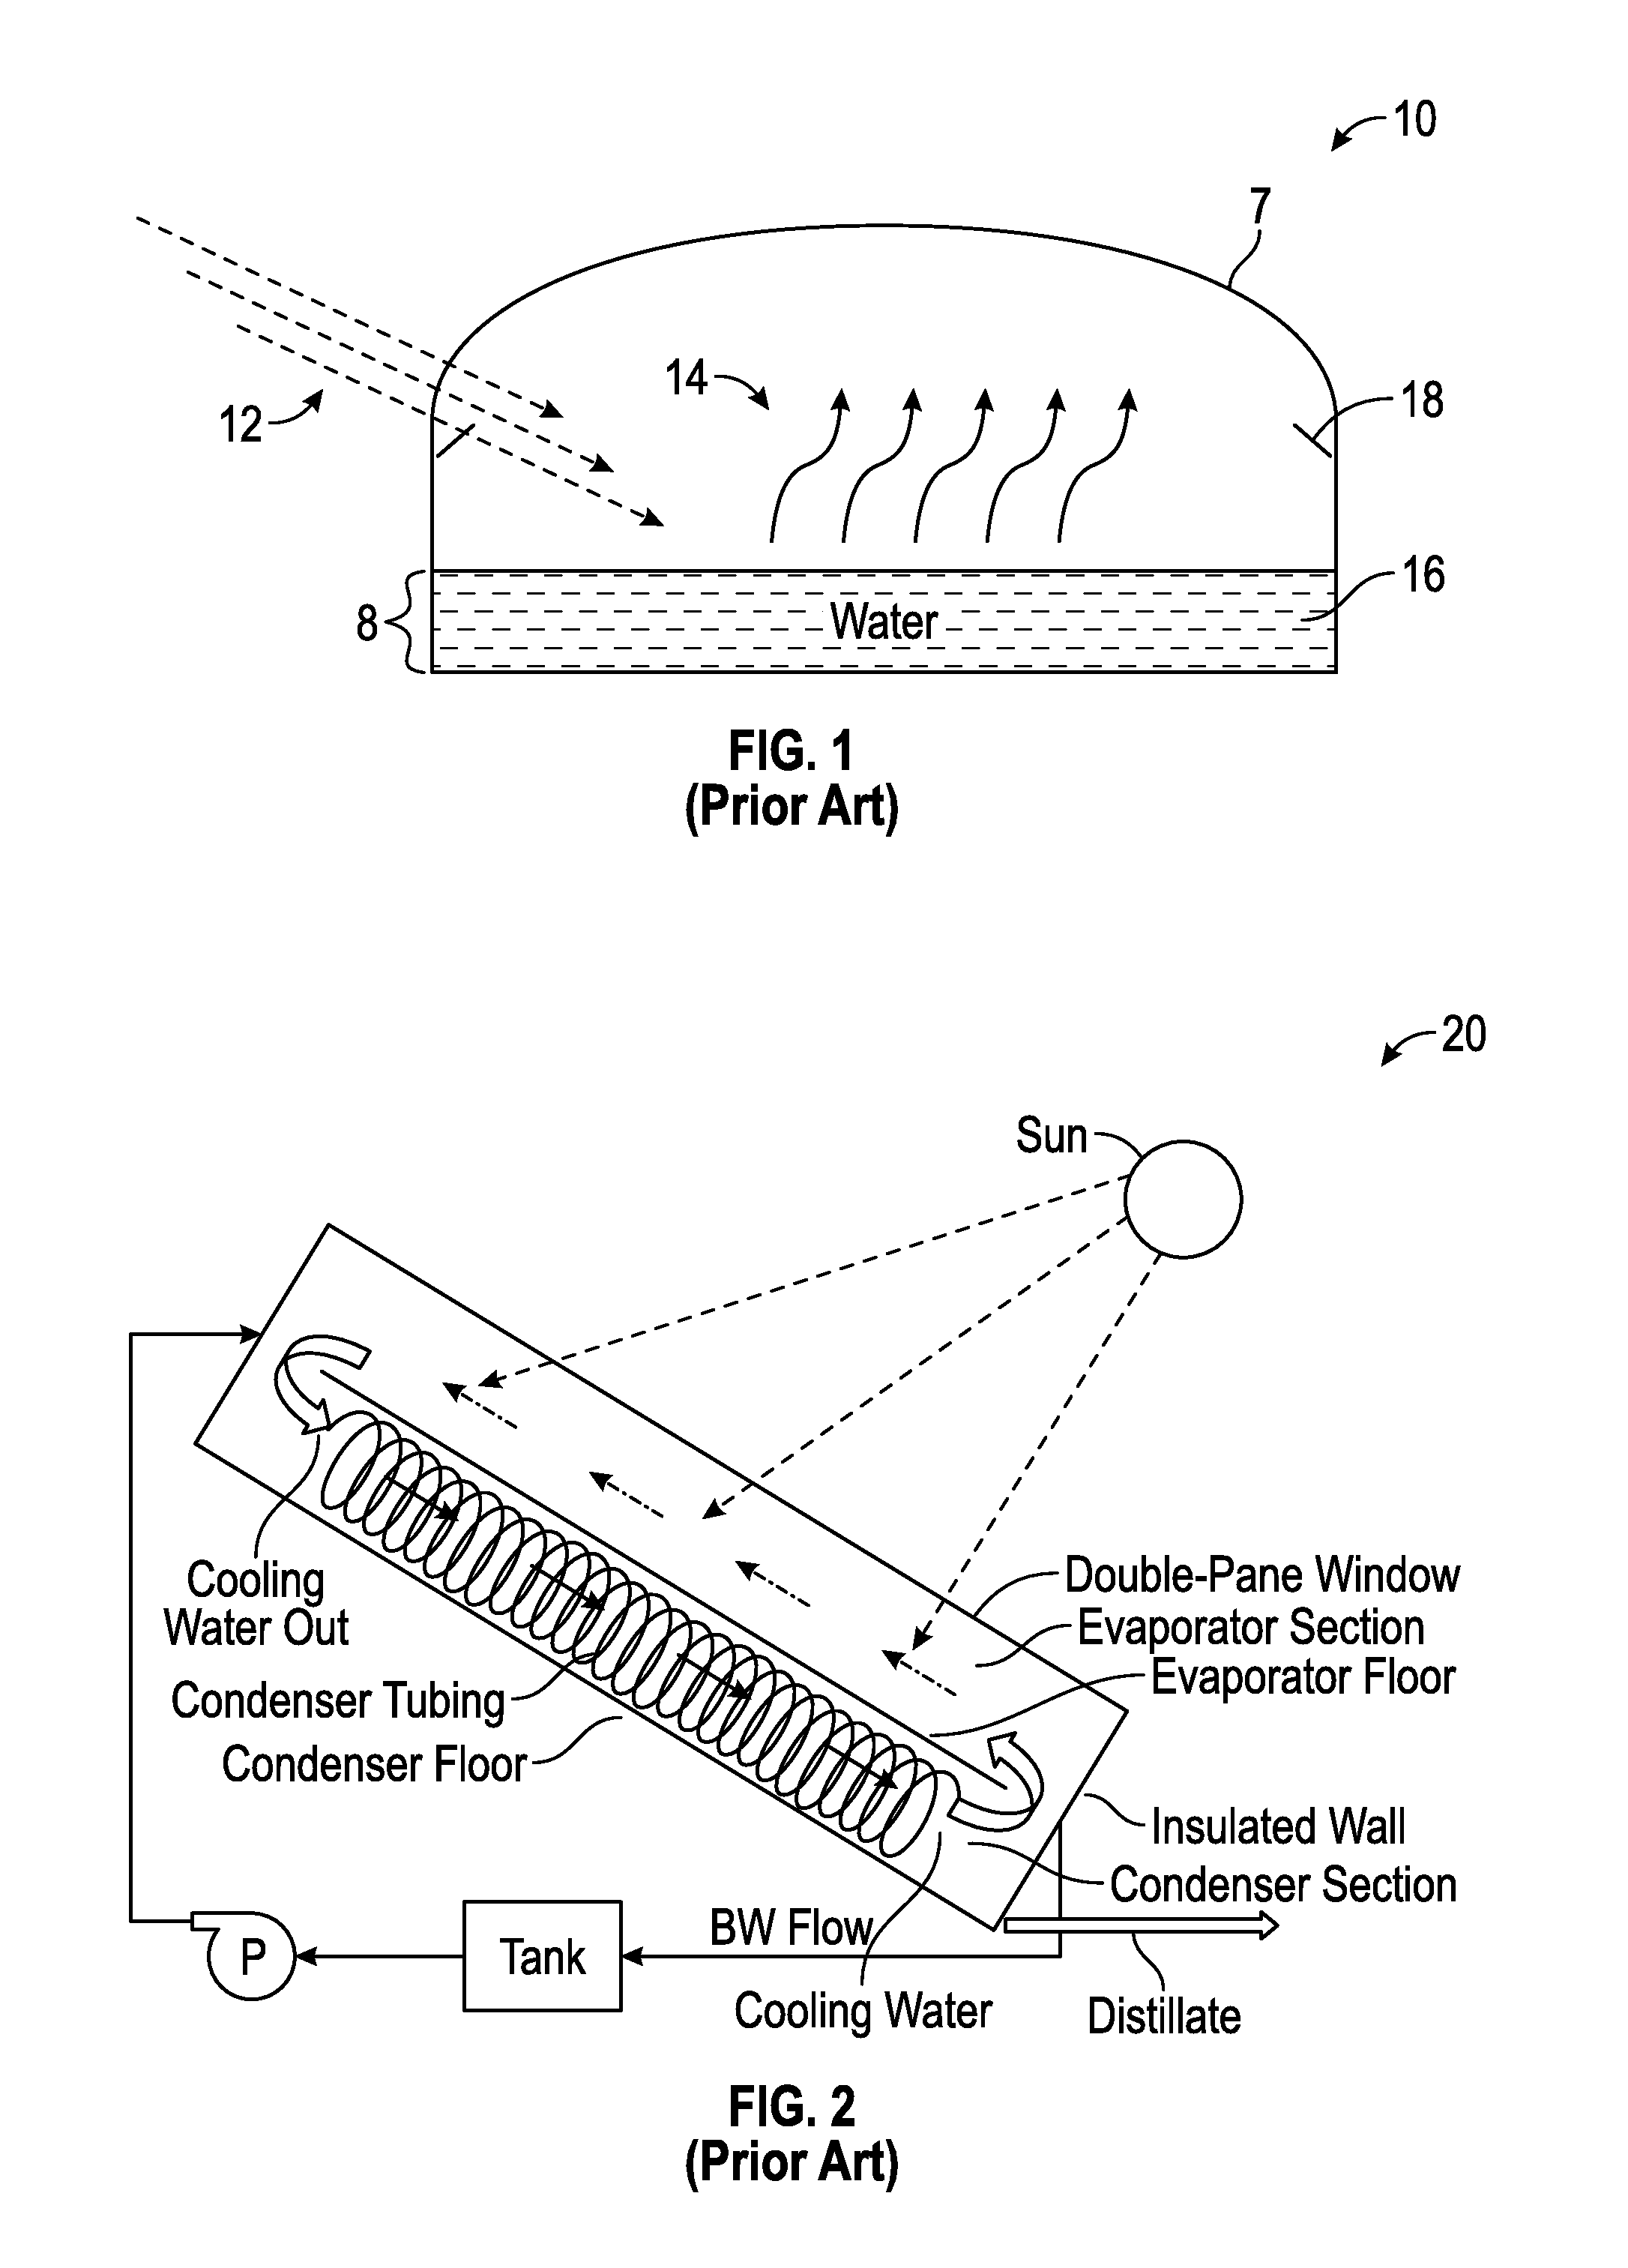 Solar still countercurrent flow system and apparatus